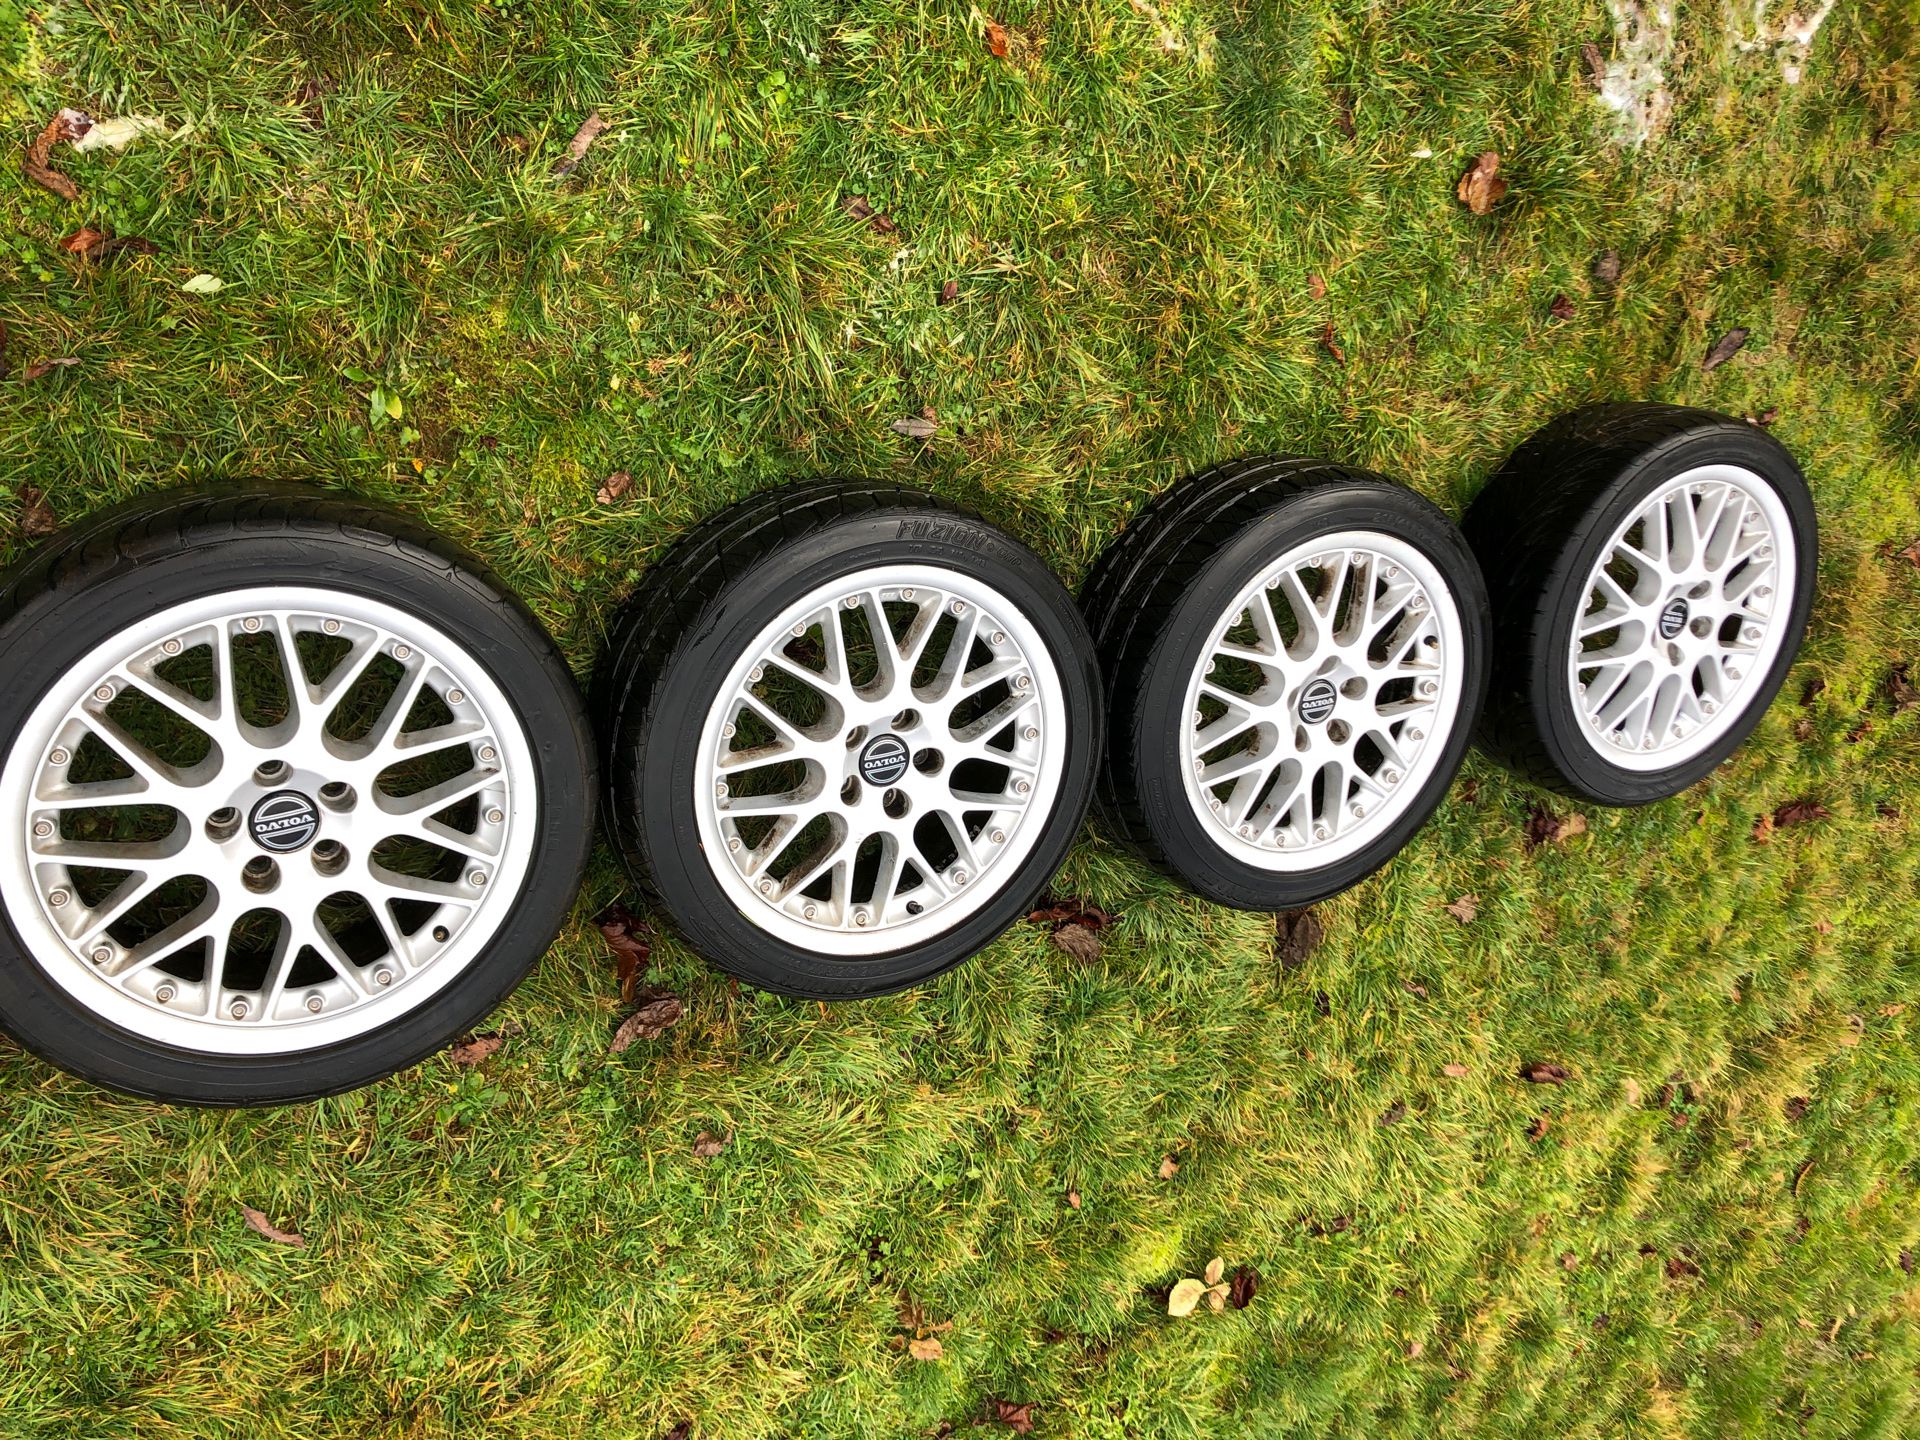 Volvo V70 17" OEM Wheels good tires will fit other Volvo’s